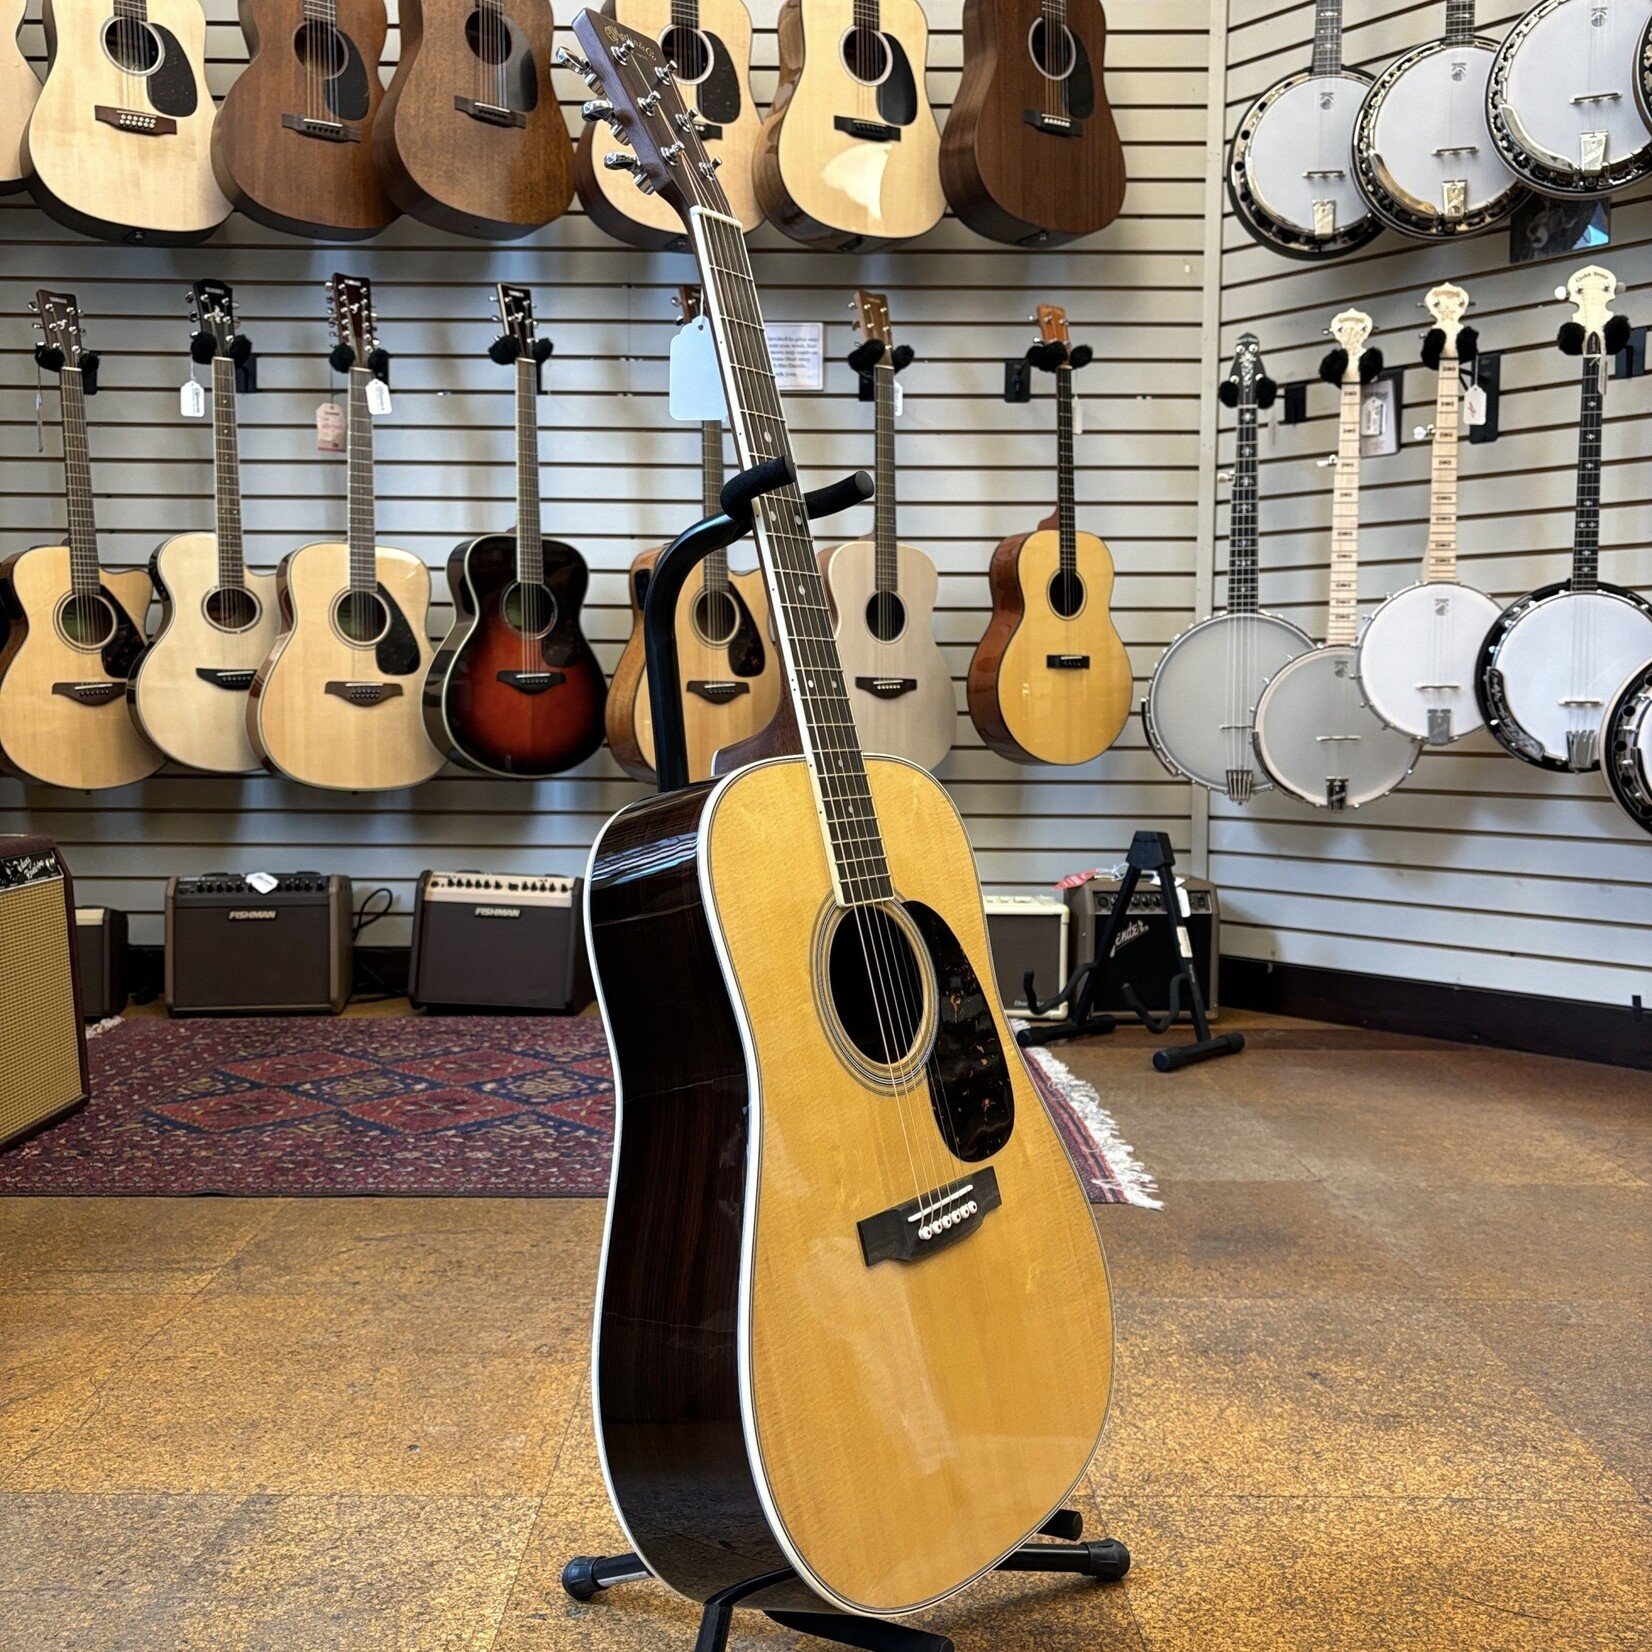 Martin Martin D-35 Standard Series Sitka Spruce/East Indian Rosewood Dreadnought Acoustic Guitar w/Hard Case